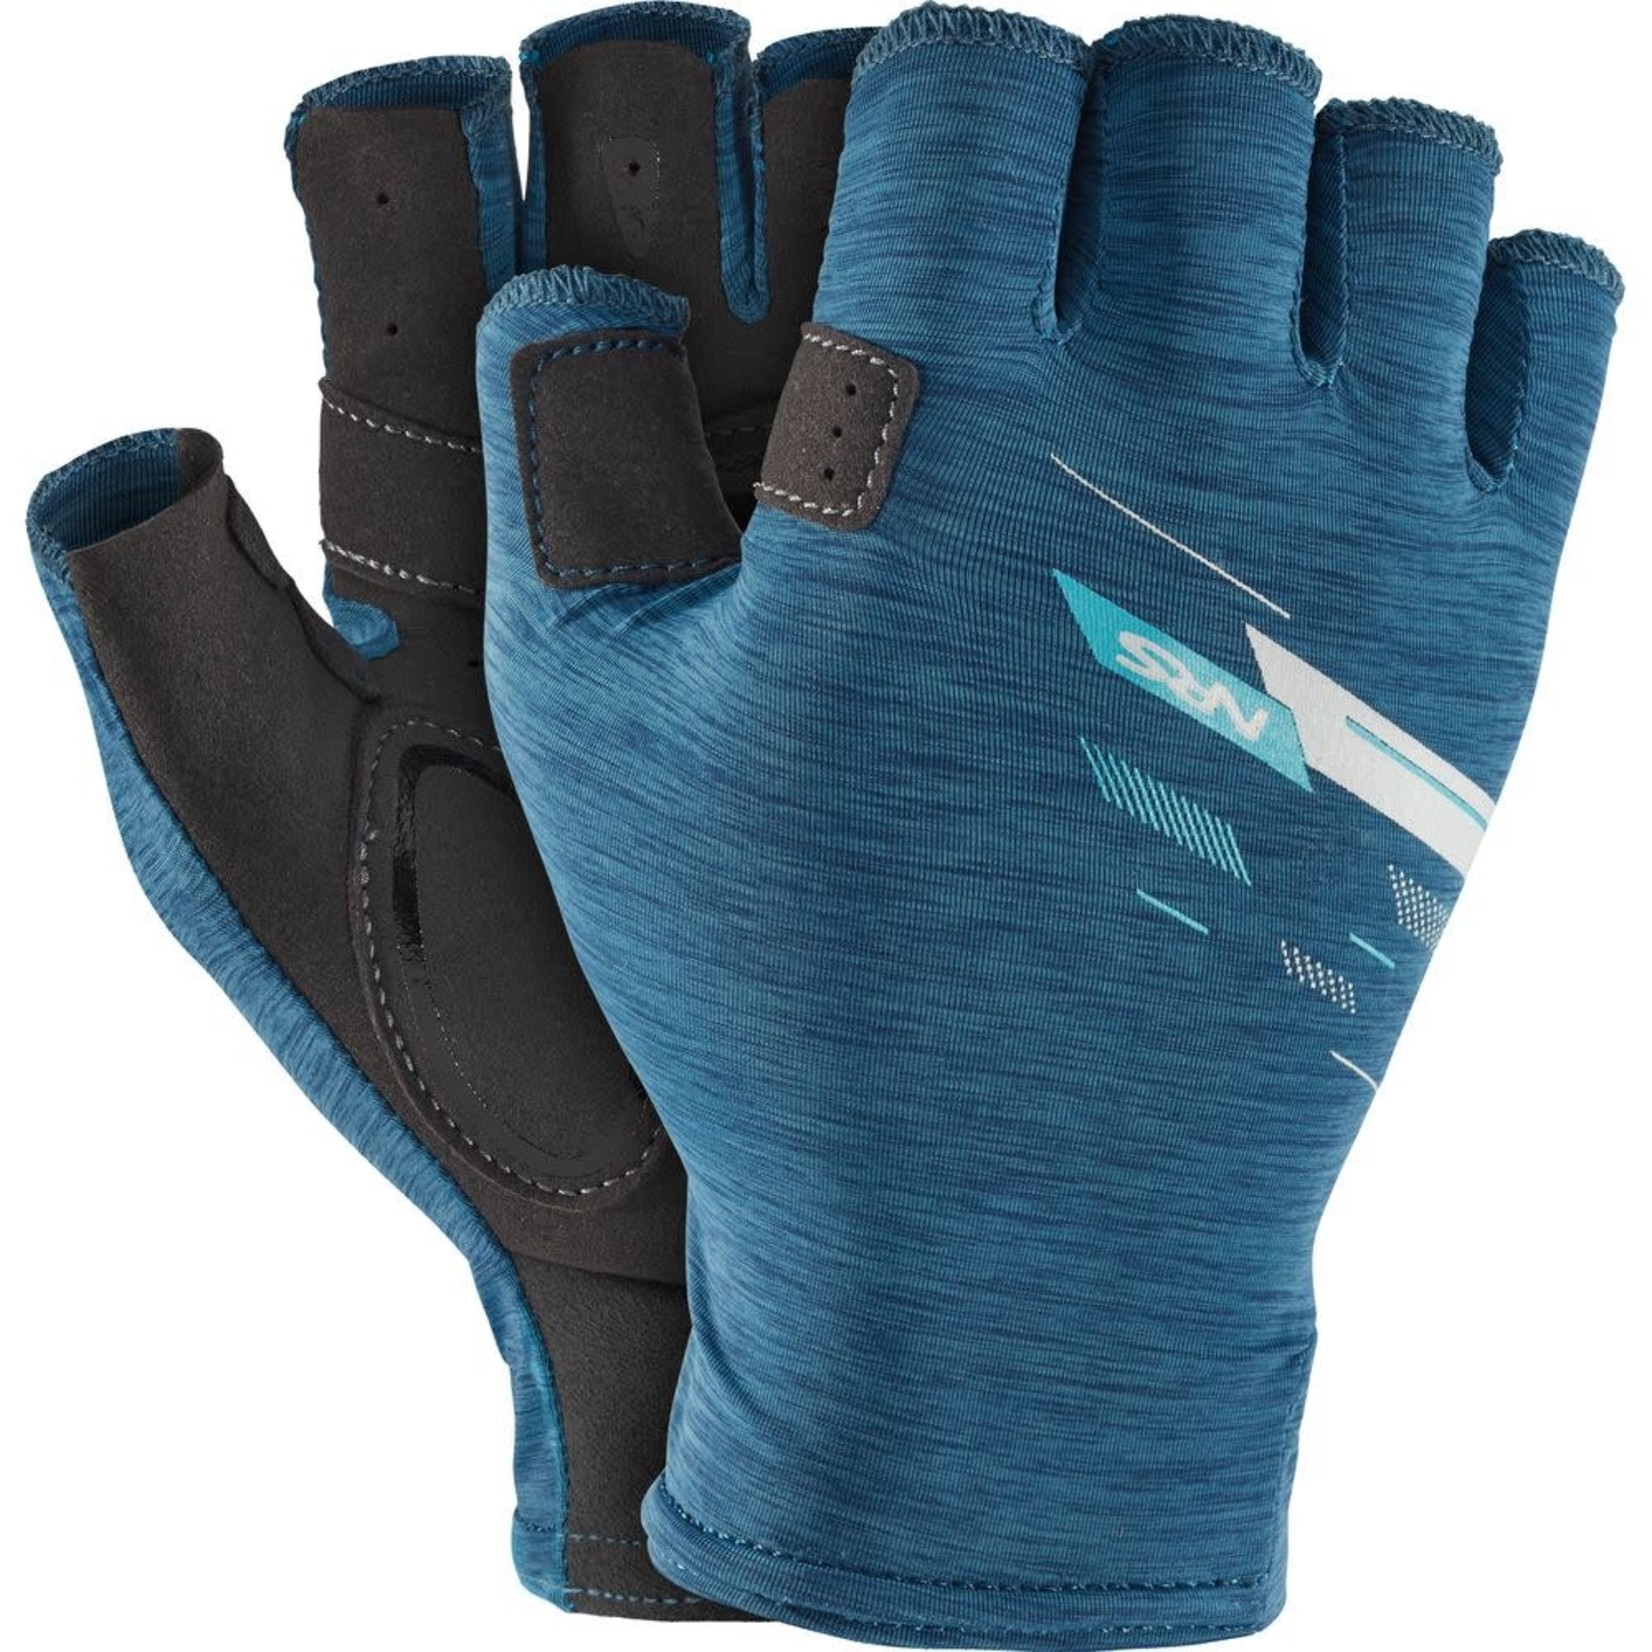 NRS NRS Men's Boater's Gloves XS **Closeout**